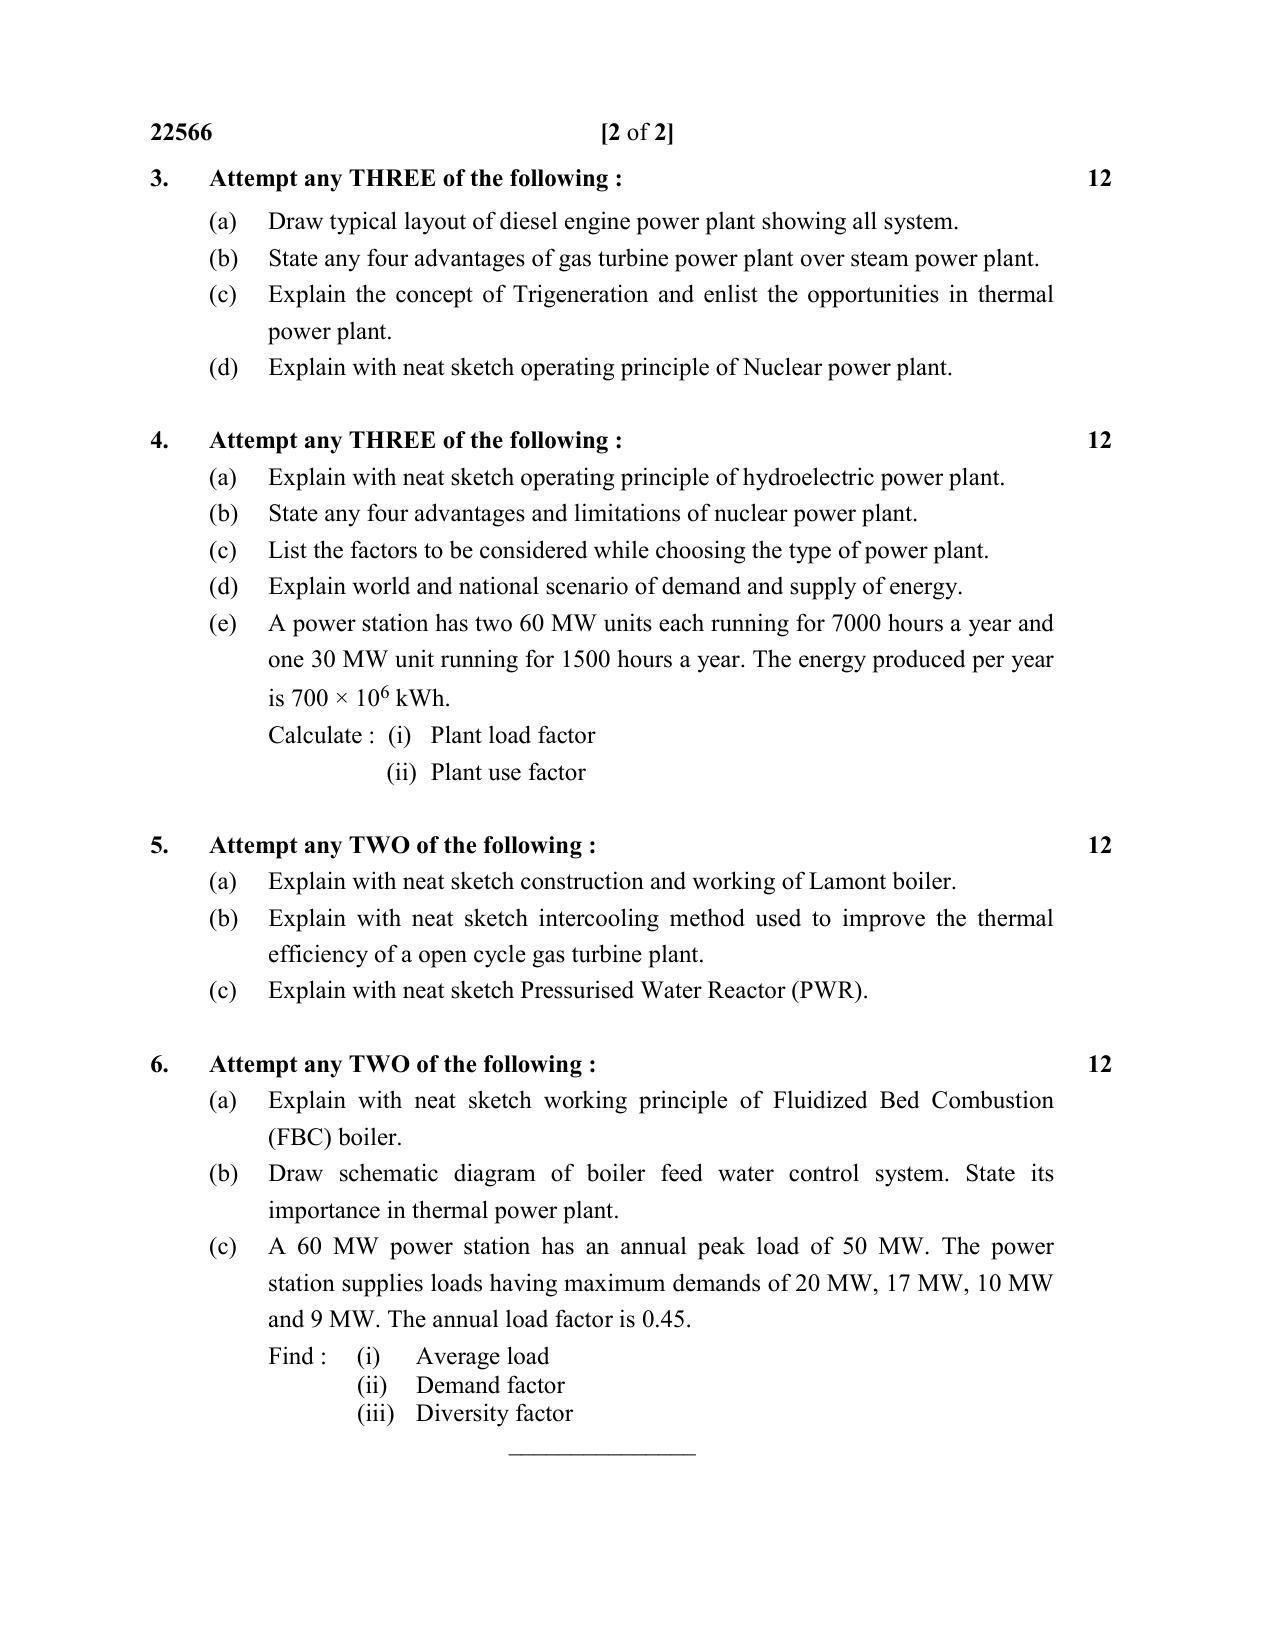 MSBTE Question Paper - 2019 - Power Plant Engineering (Elective) - Page 2